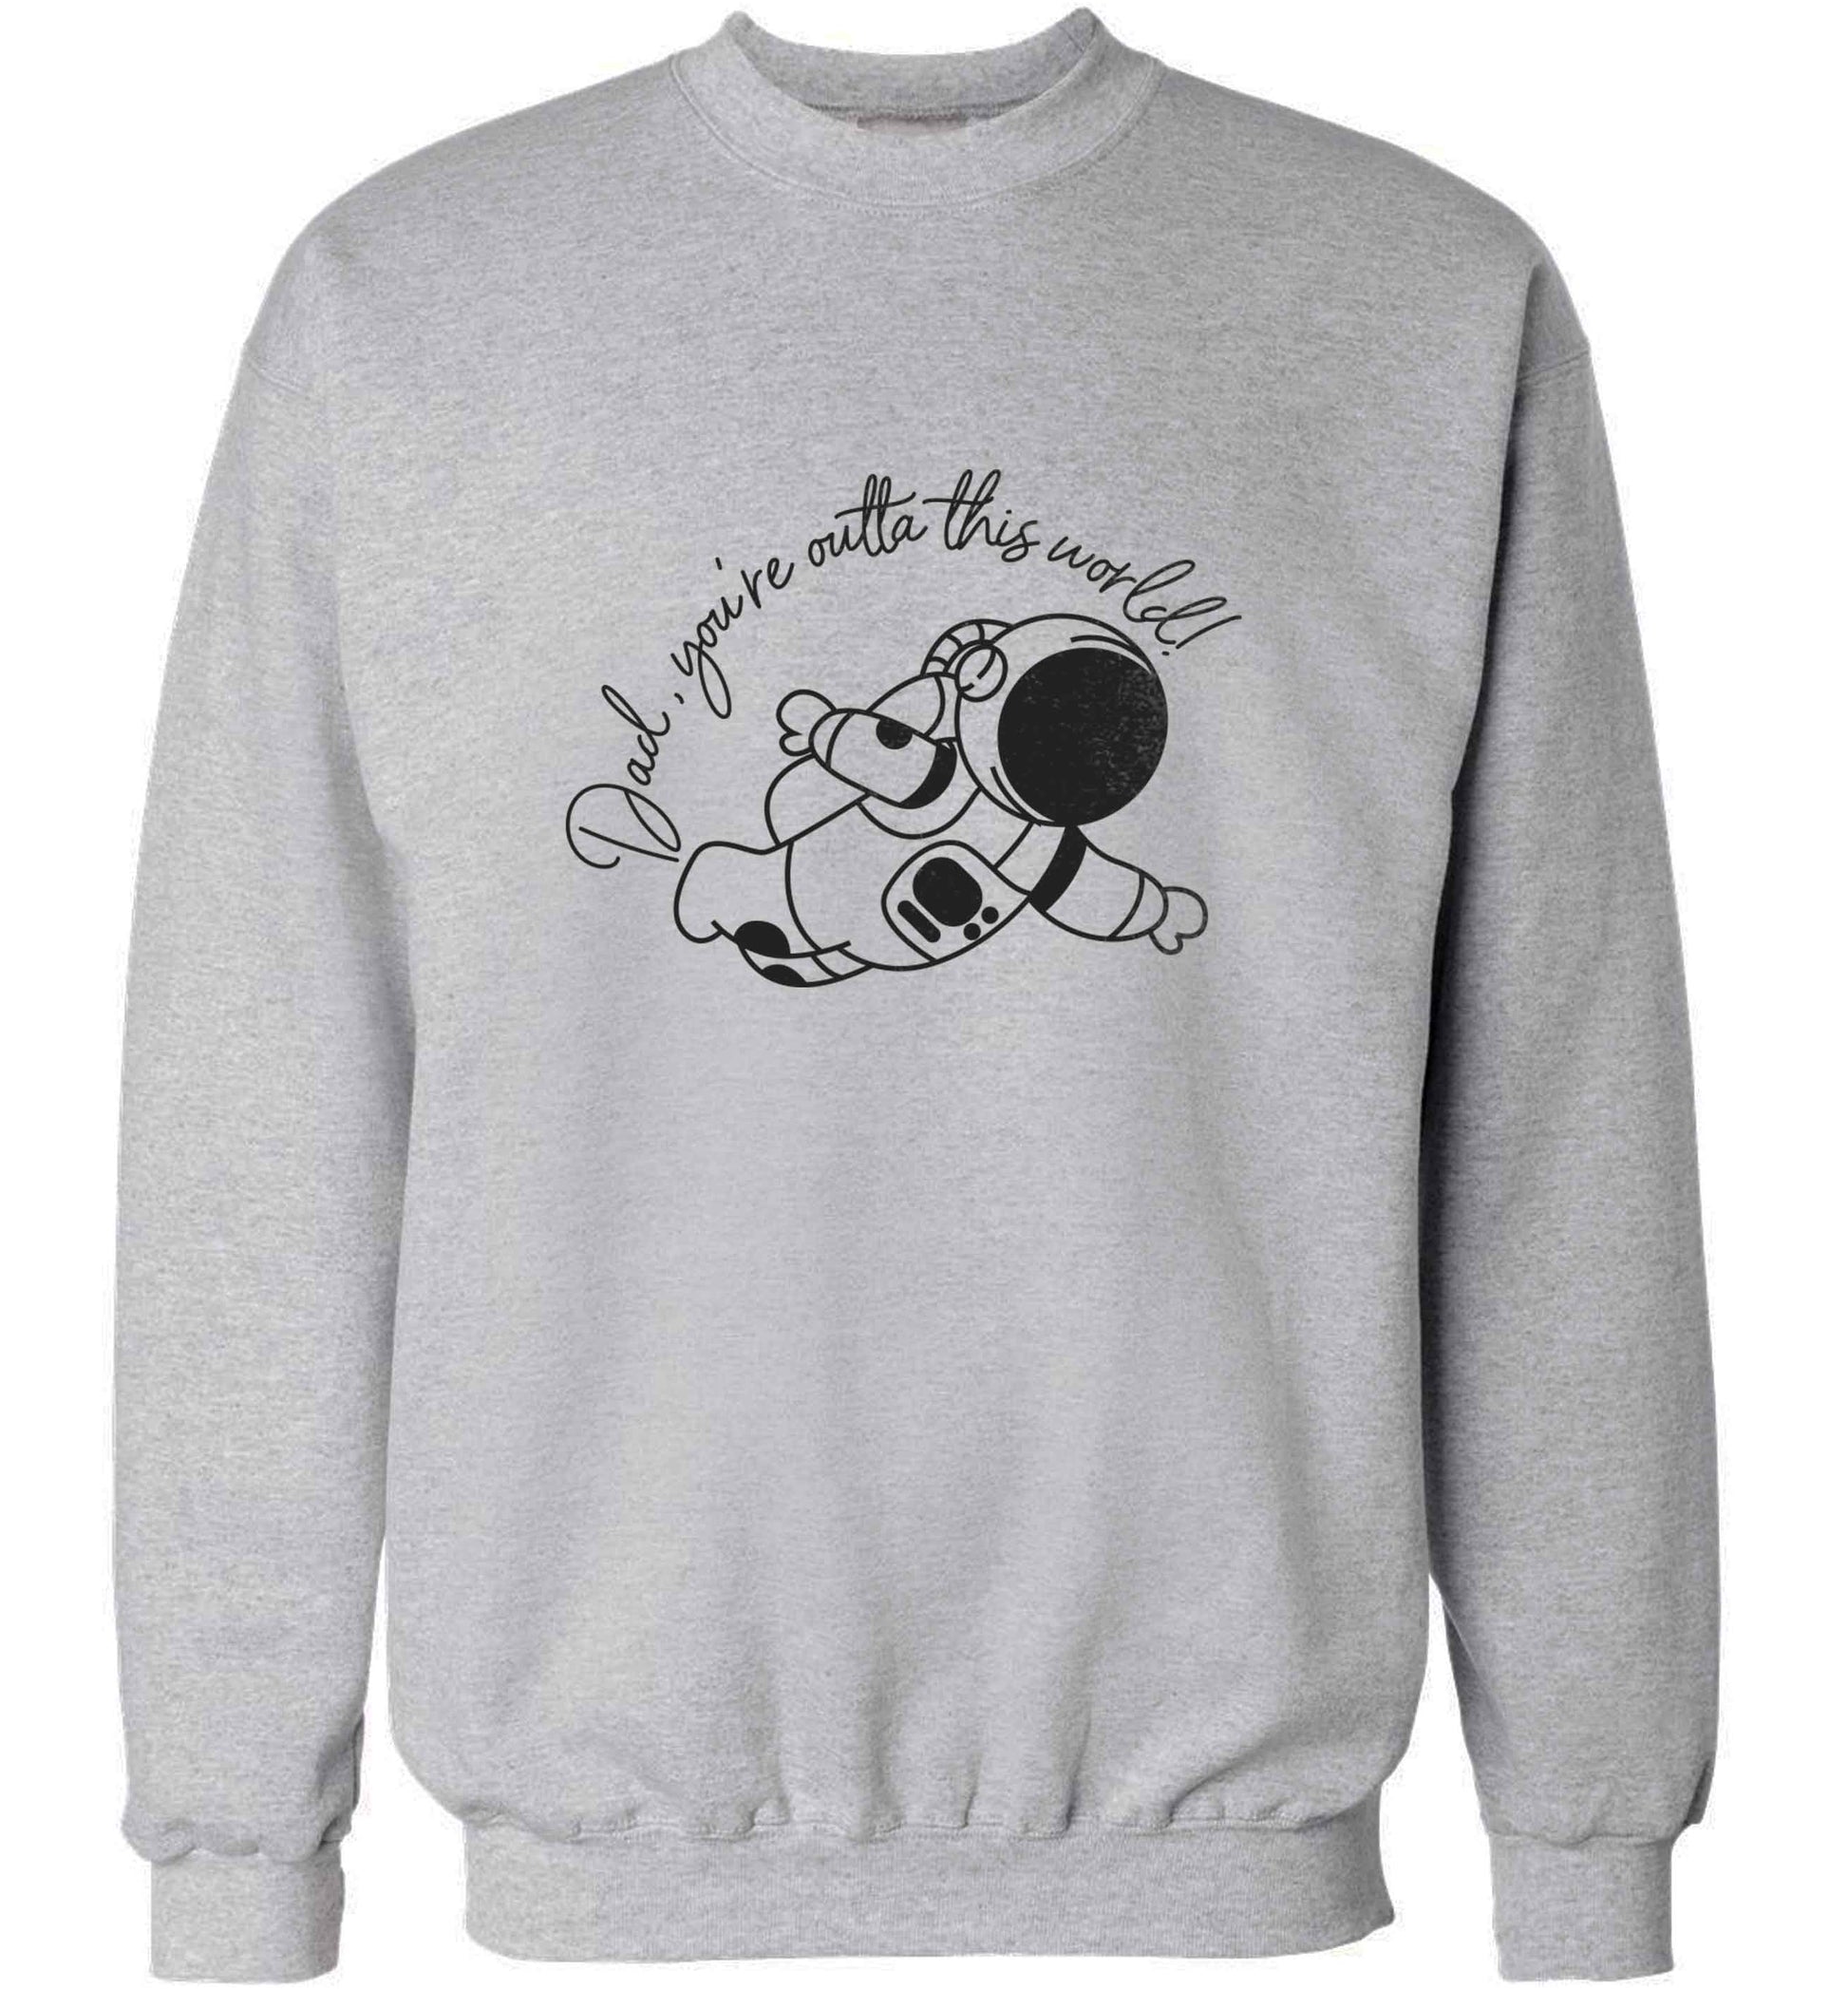 Dad, you're outta this world adult's unisex grey sweater 2XL